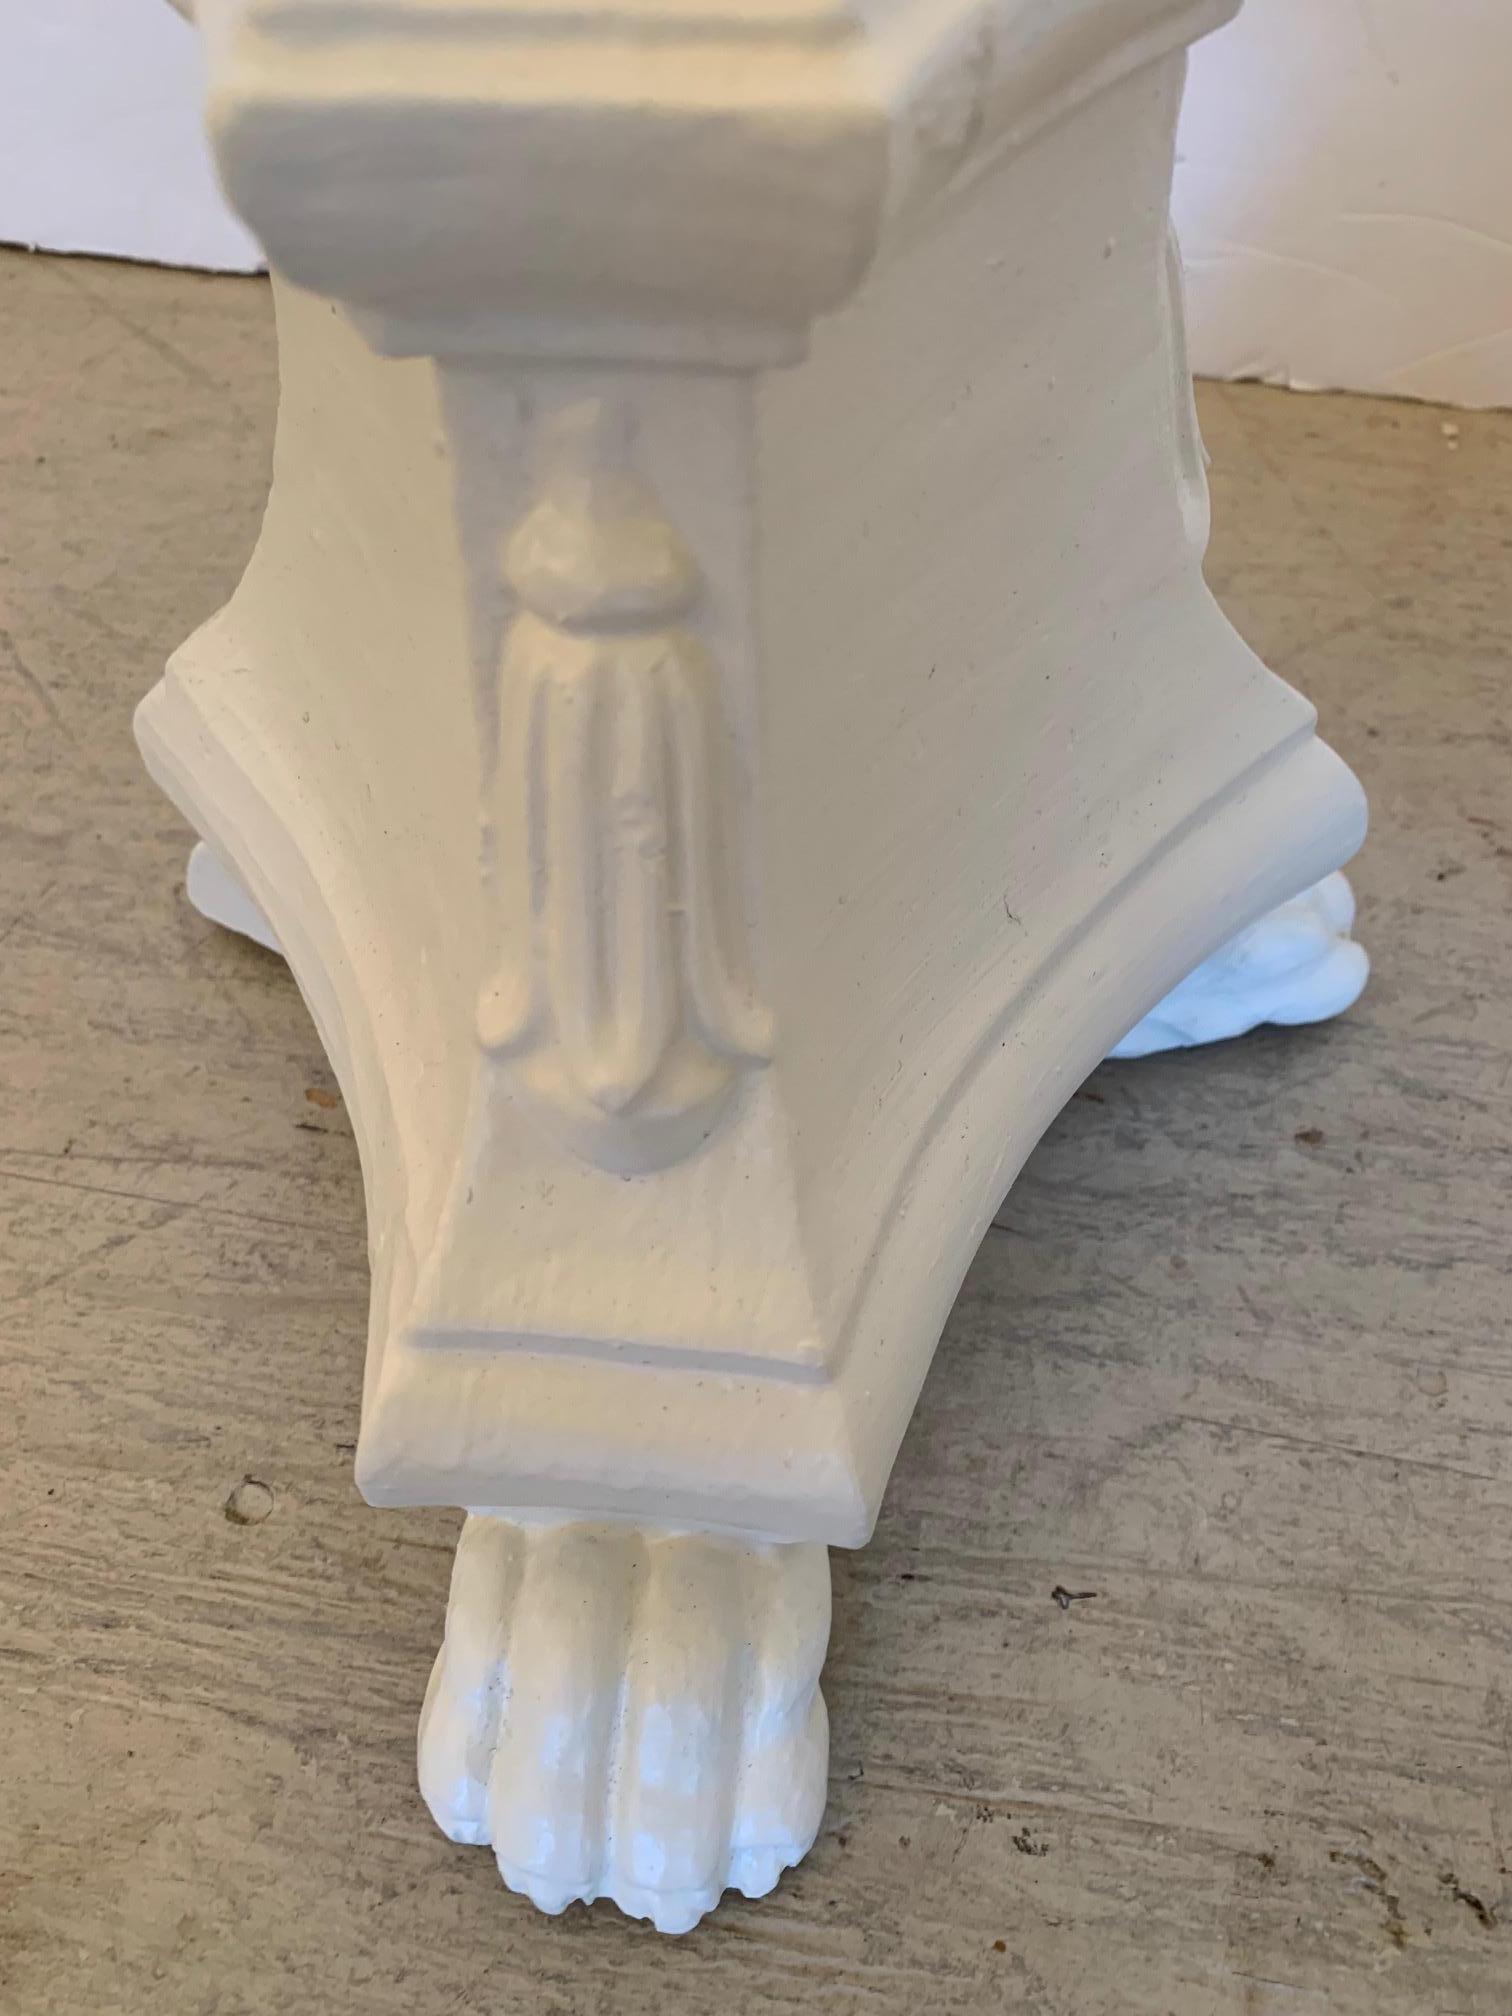 Cream painted carved wood candle holders having paw feet and tassel like decoration.
Tops are 5